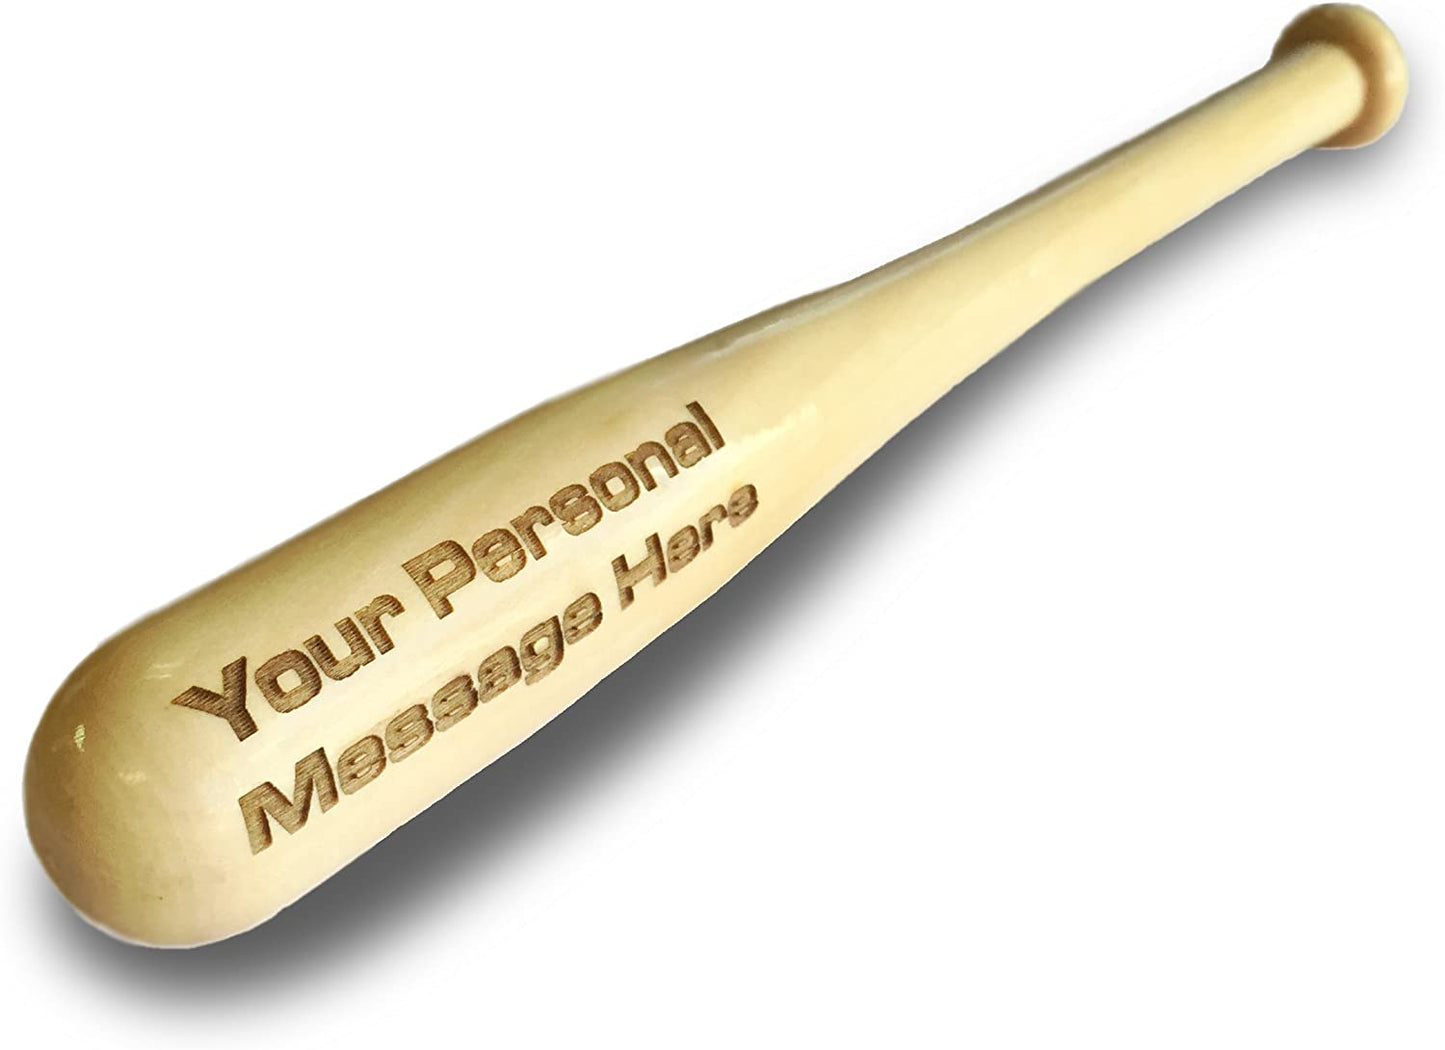 Customized Engraved Mini Toy 7 Inch Baseball Bat - Add Your Text